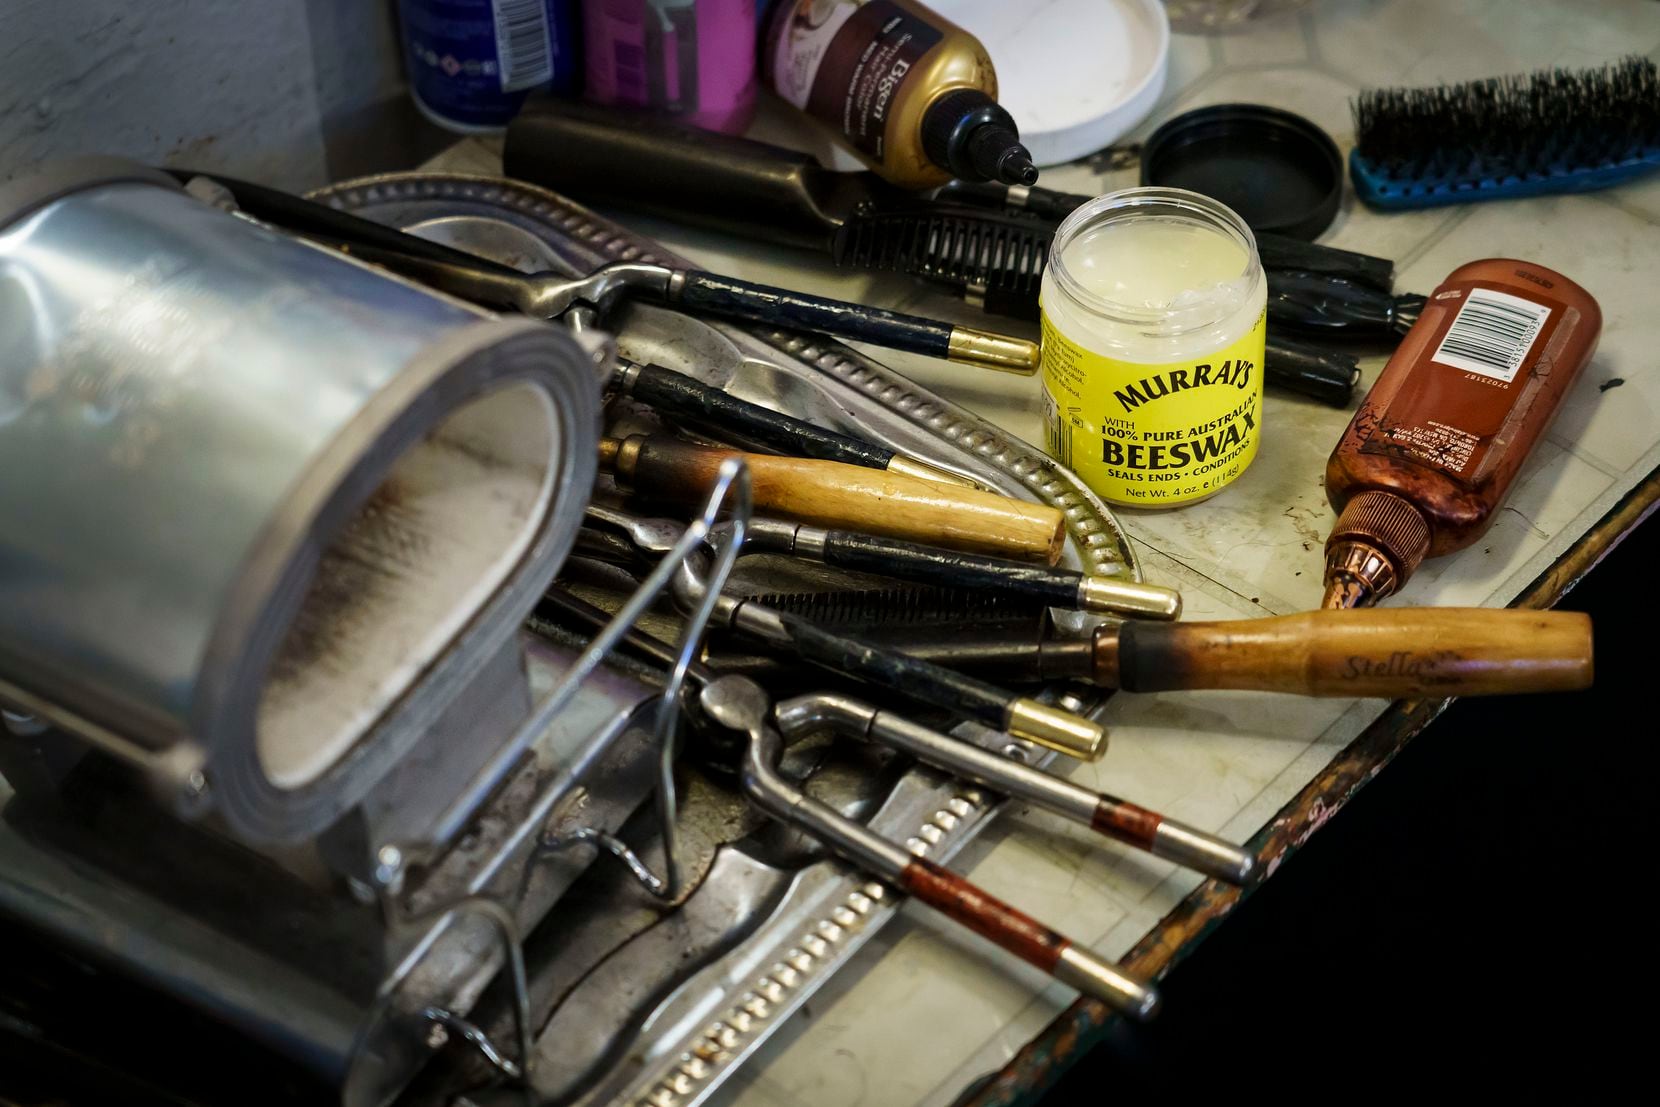 Earnestine Tarrant’s supplies and equipment are seen at her station in her hair salon on her final day working before her retirement.